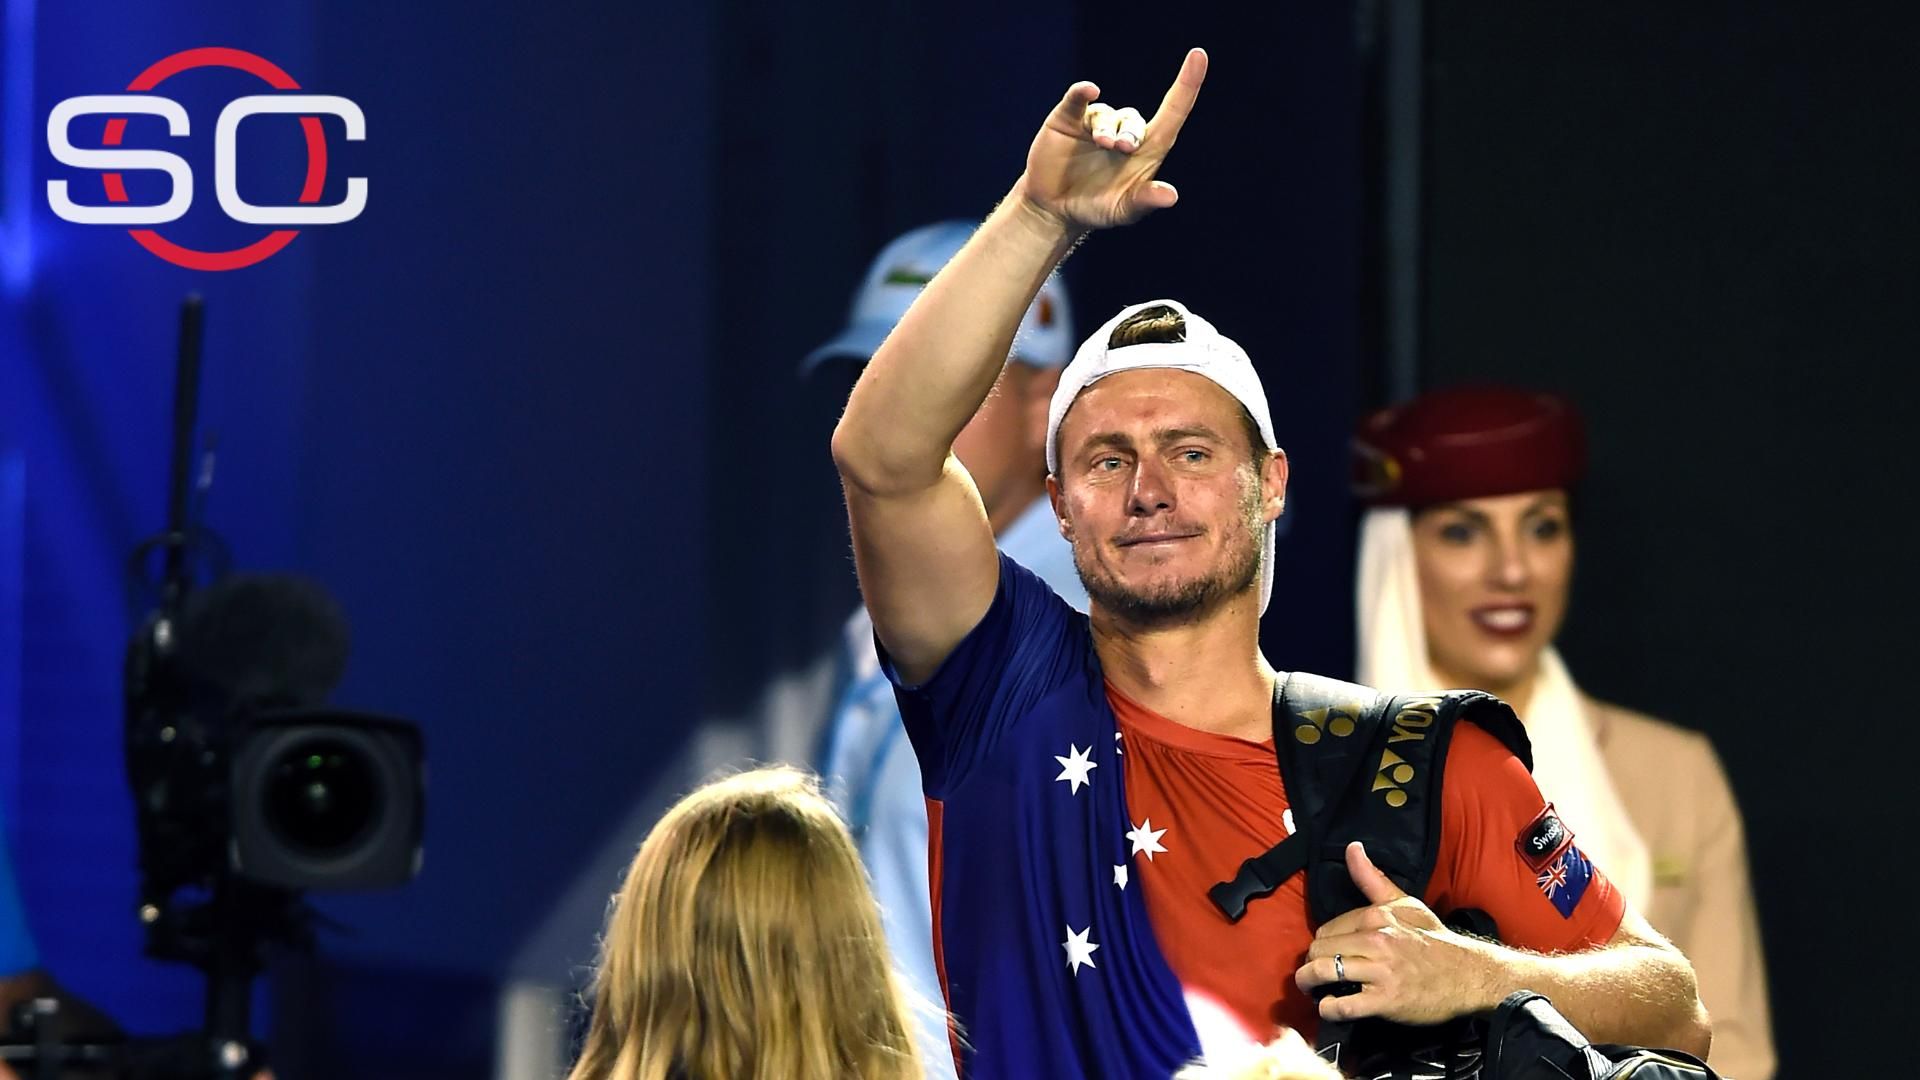 Hewitt ends singles career with loss to Ferrer